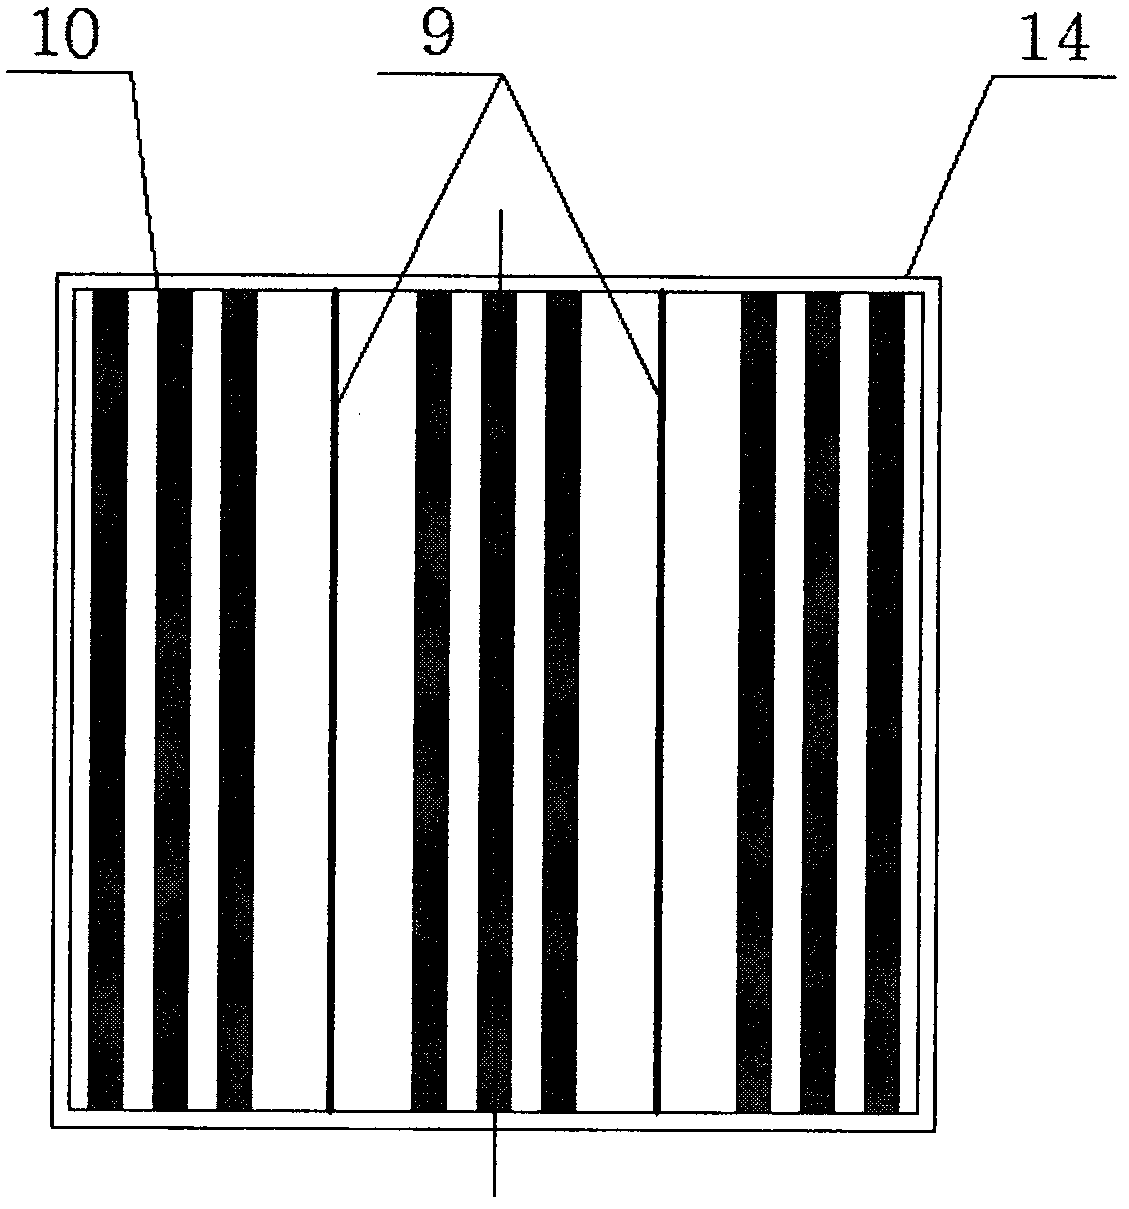 Bipolar pre-charging device with single power supply transverse rod